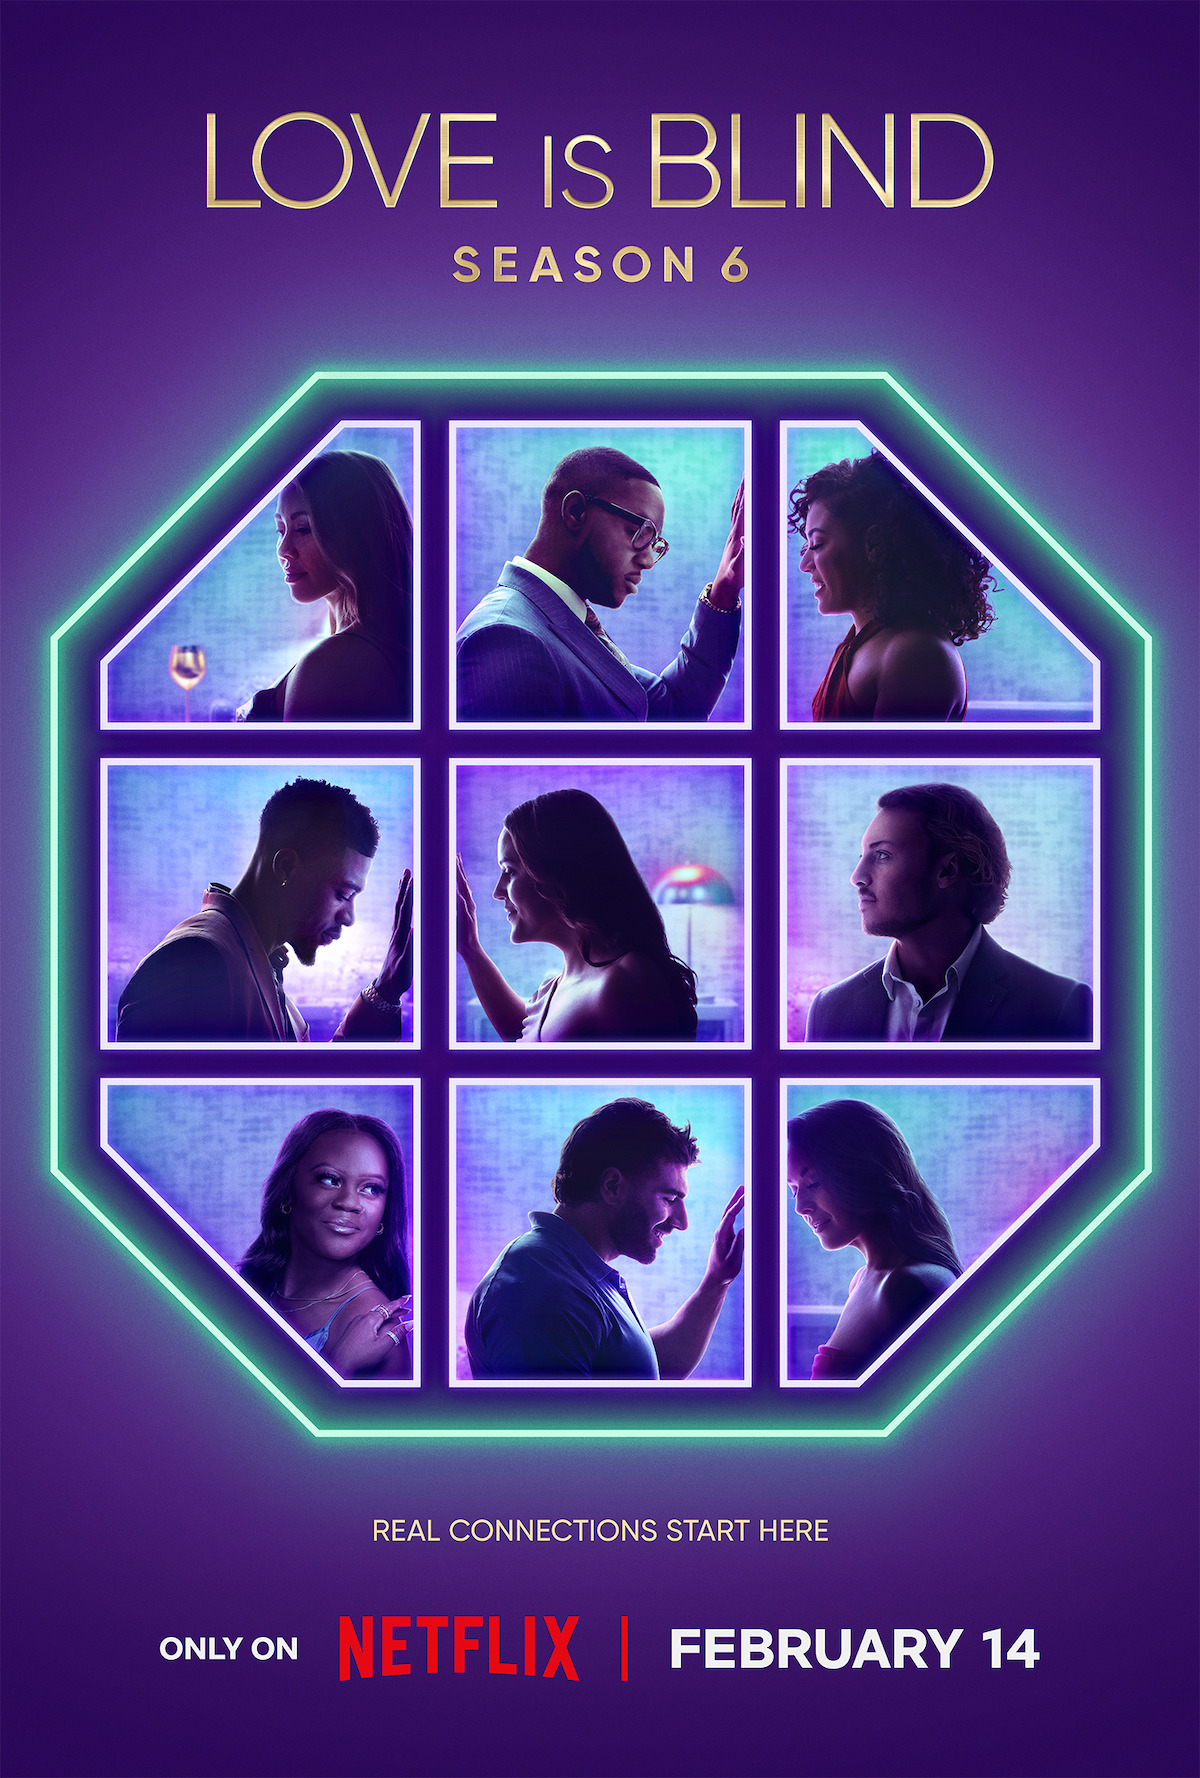 Promotional poster for &quot;Love Is Blind&quot; Season 6, featuring silhouettes of couples in hexagonal frames with premiere date